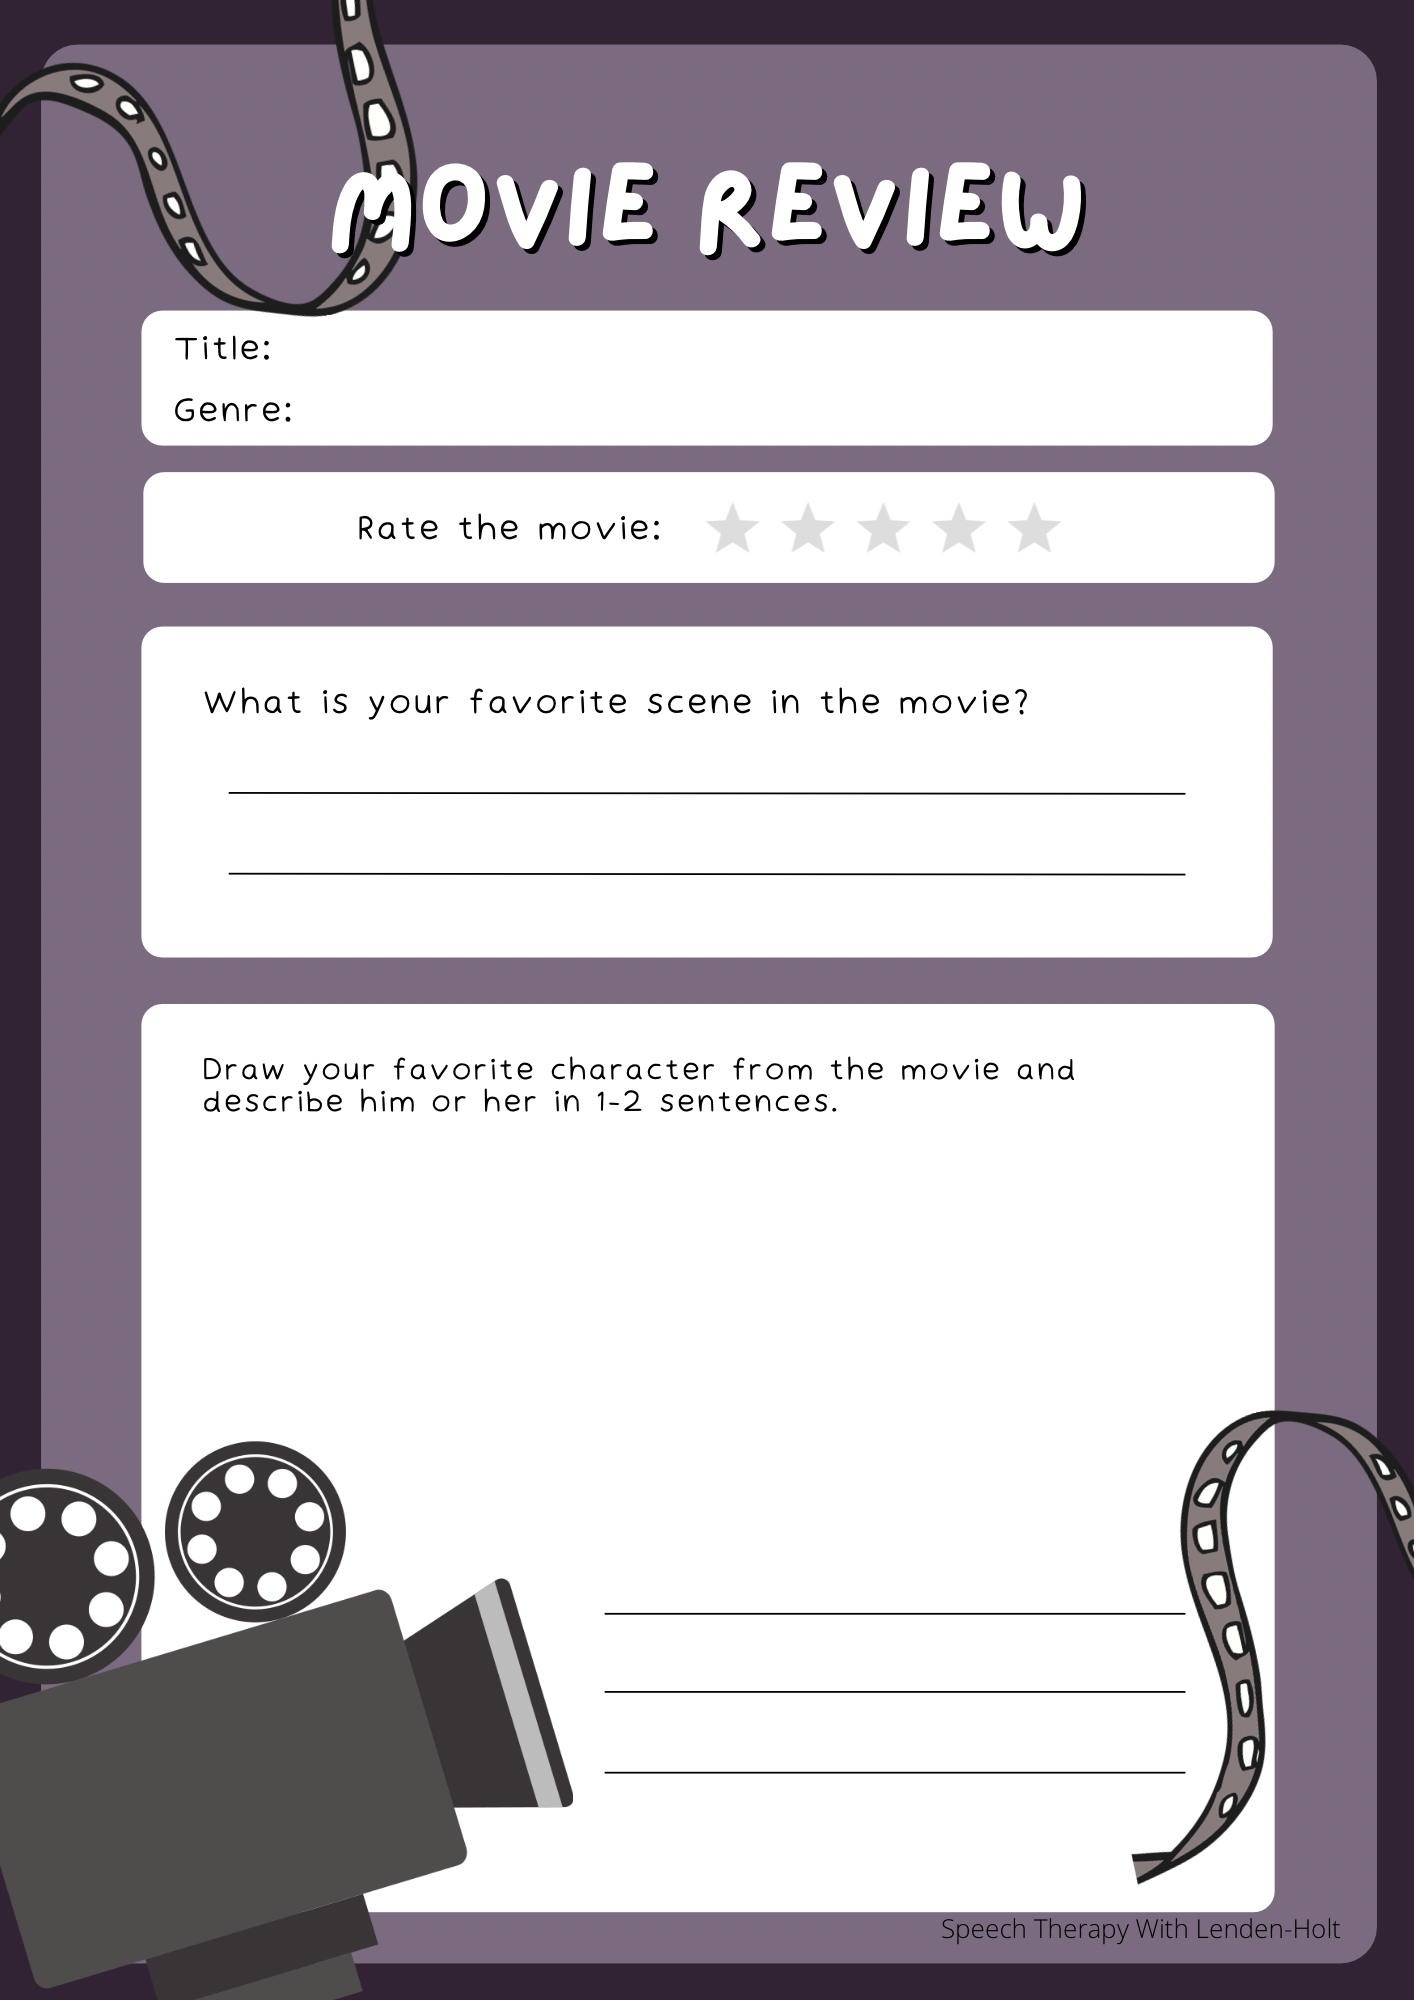 Movie Film Review Template image